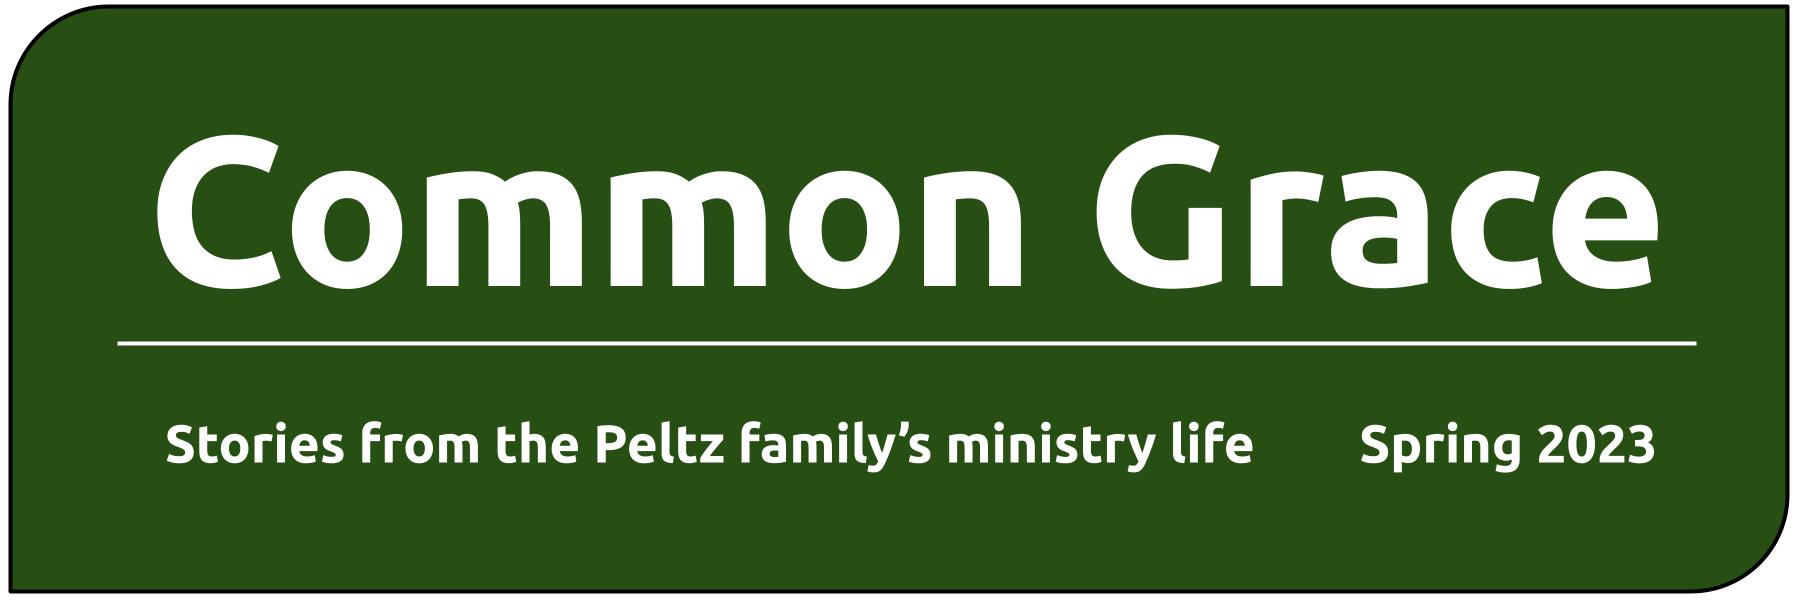 Common Grace: Stories from the Peltz Family's Ministry Life